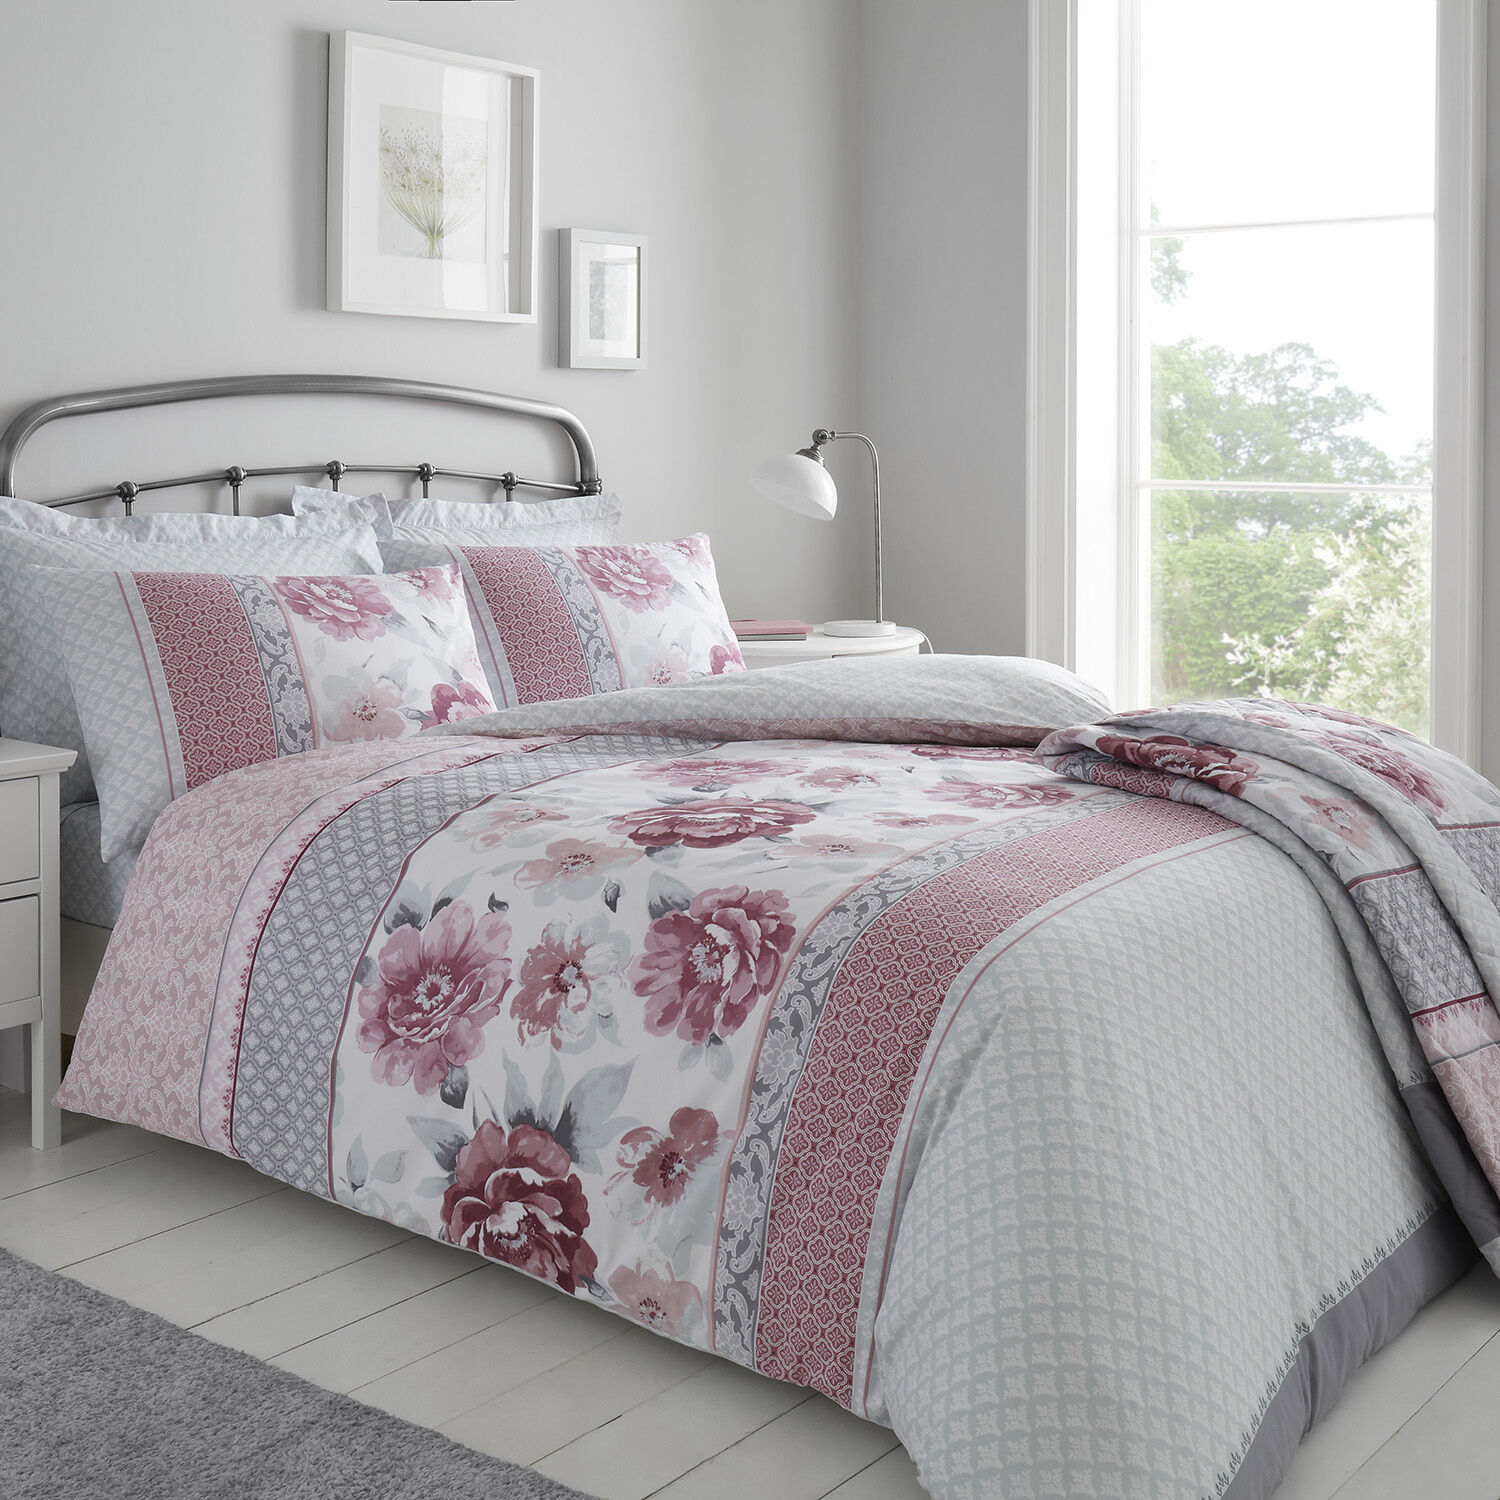 Ophelia Bed Linen Home More, Super King Bedding Sets Grey And Pink